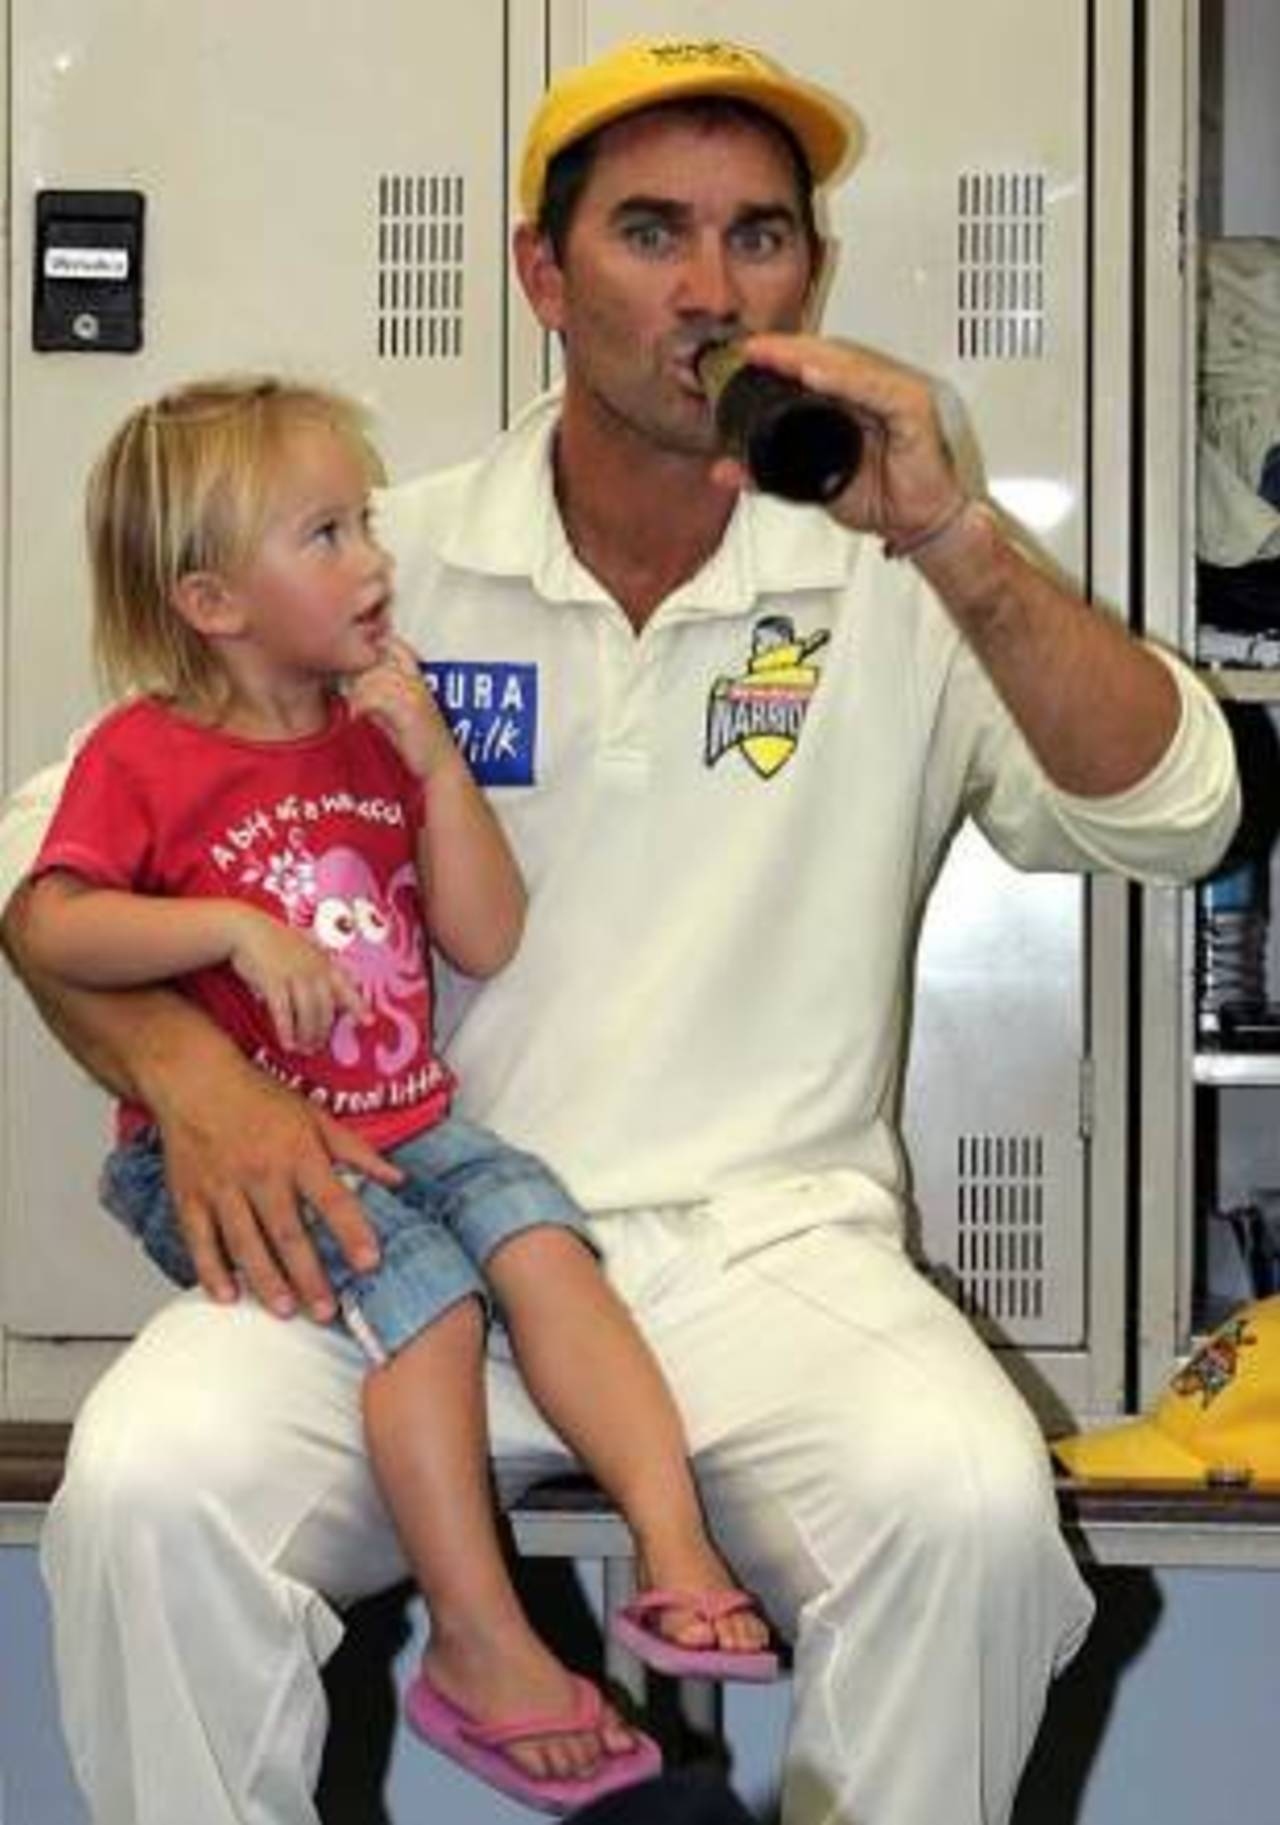 Langer didn't much care that the child on his lap was a little girl and proceeded with his lec-dem on chapter one of <i>The Ways of Real Aussie Men</i> anyway&nbsp;&nbsp;&bull;&nbsp;&nbsp;Getty Images